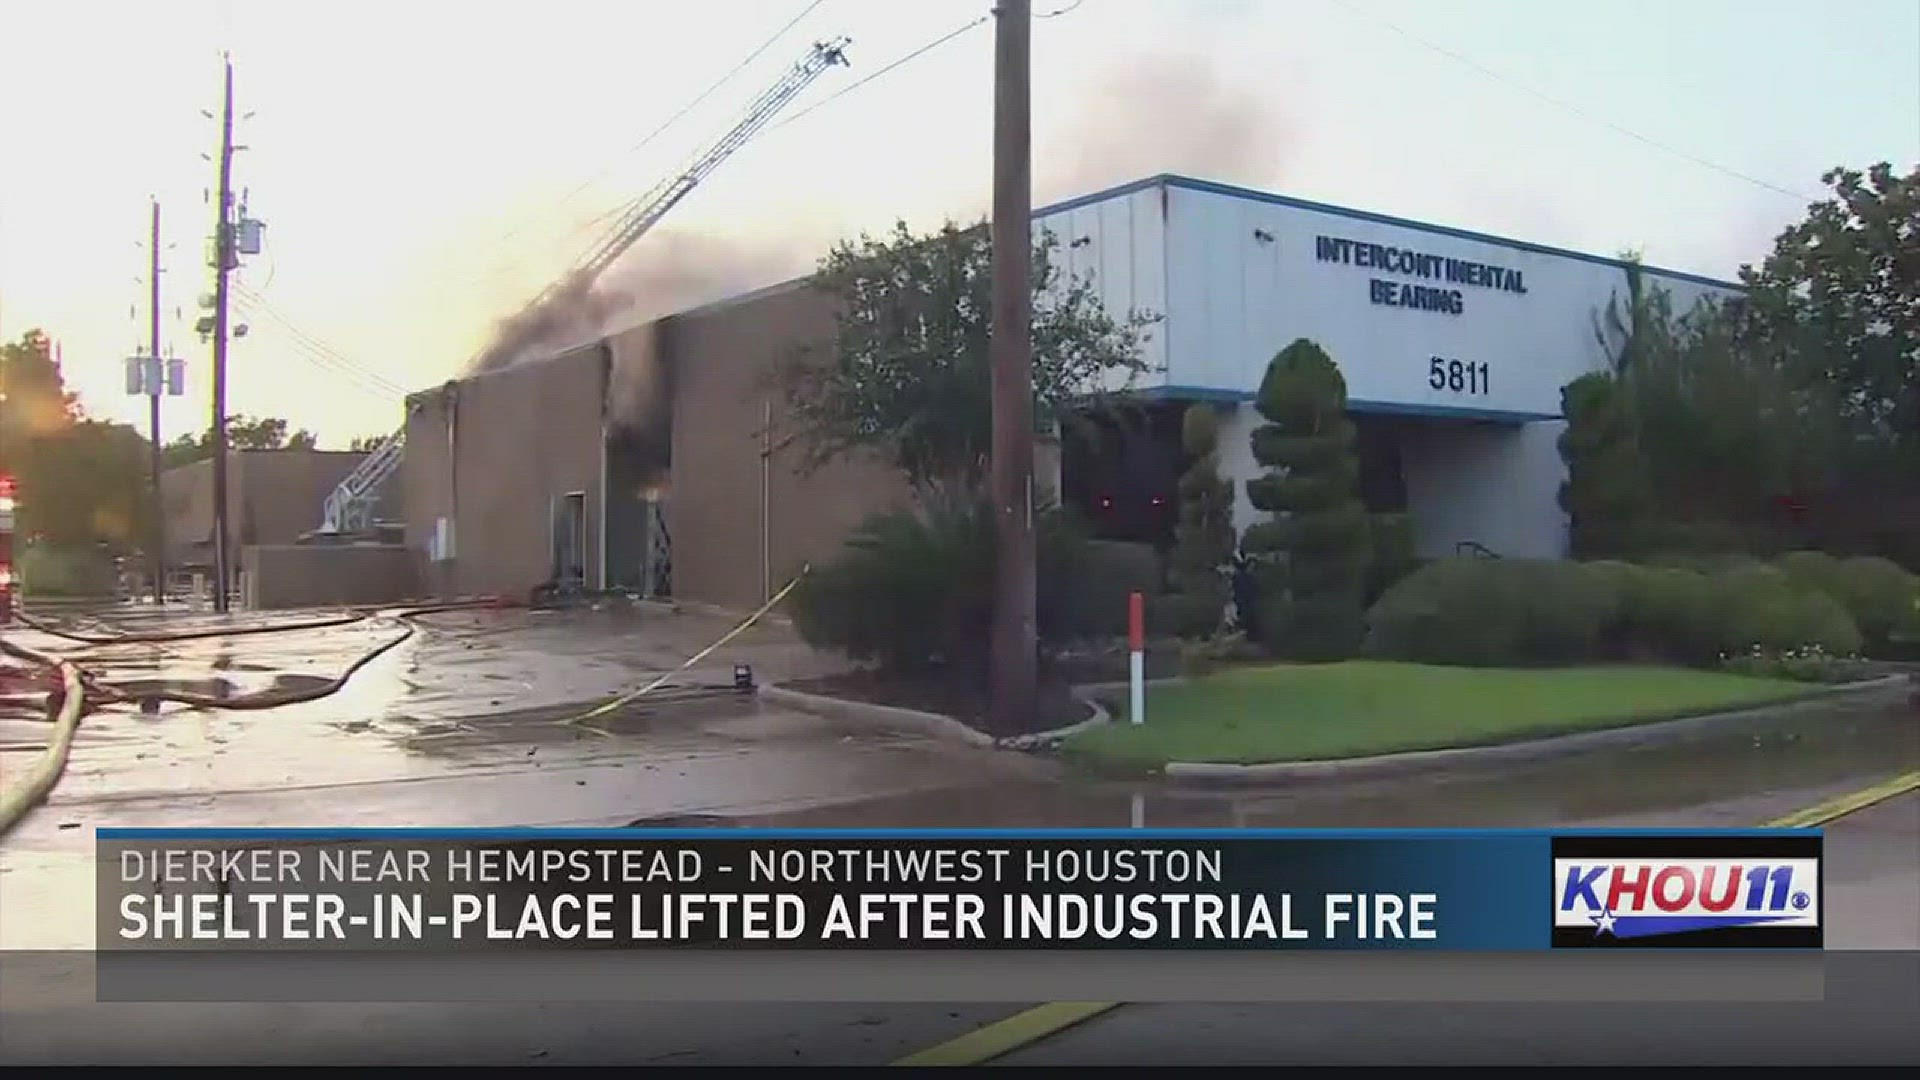 The City of Houston has lifted a shelter-in-place order after firefighters battled a large structure fire in northwest Houston.